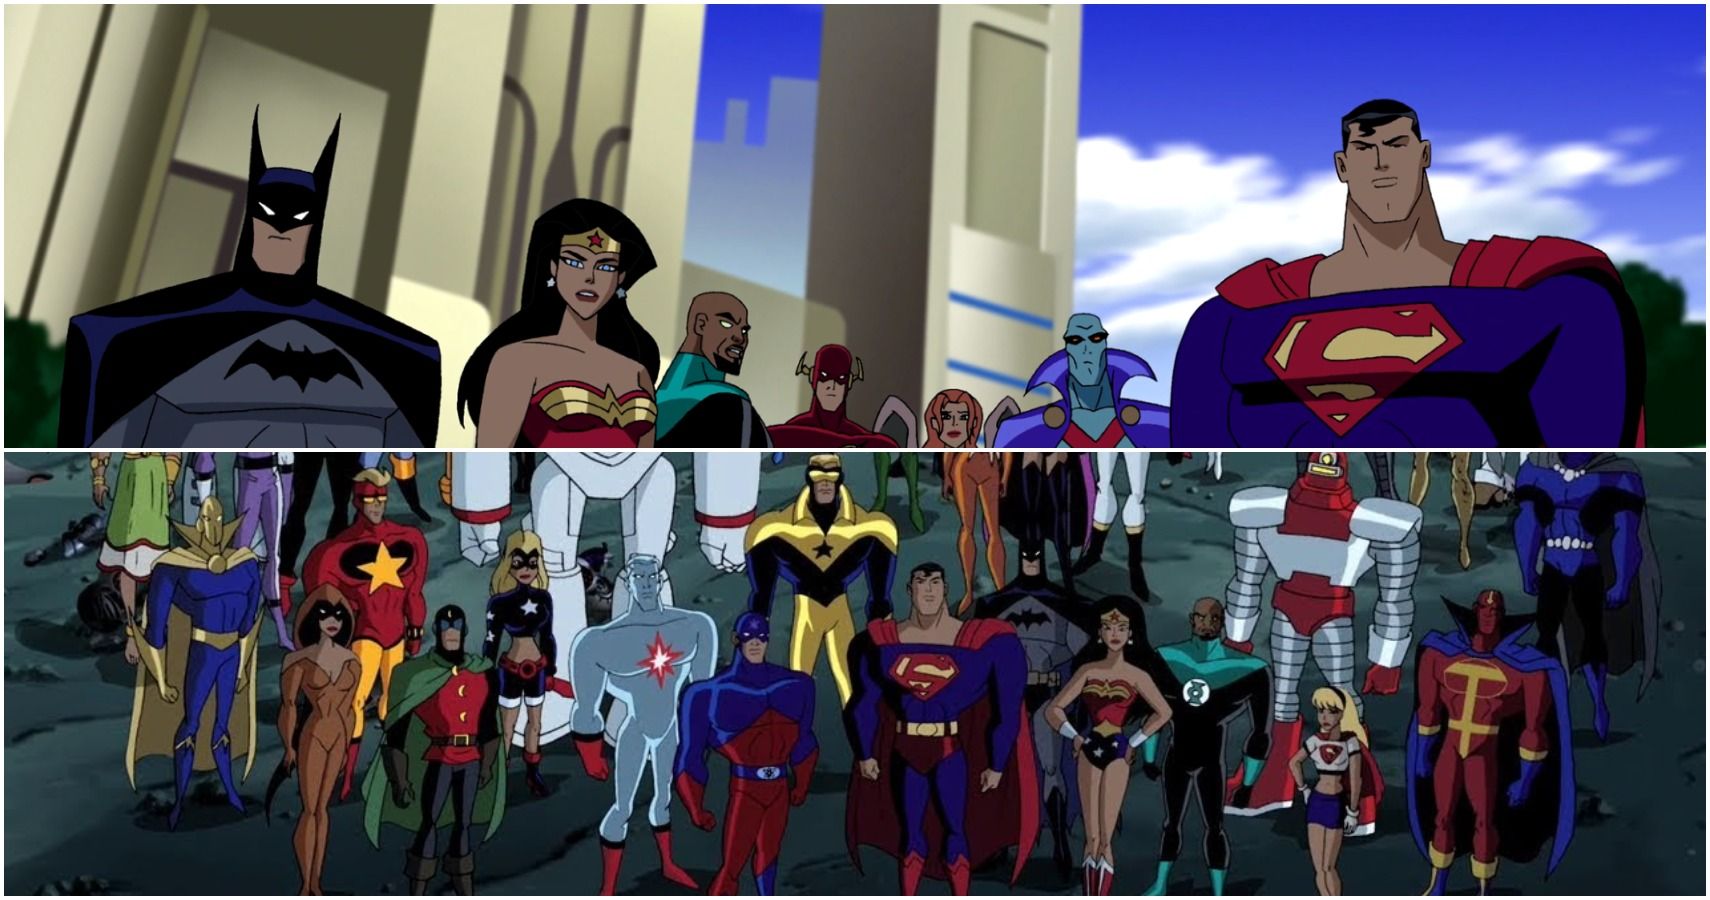 5 Reasons Why We Liked The Original Justice League Cartoon The Best (& 5  Why Unlimited Was Better)